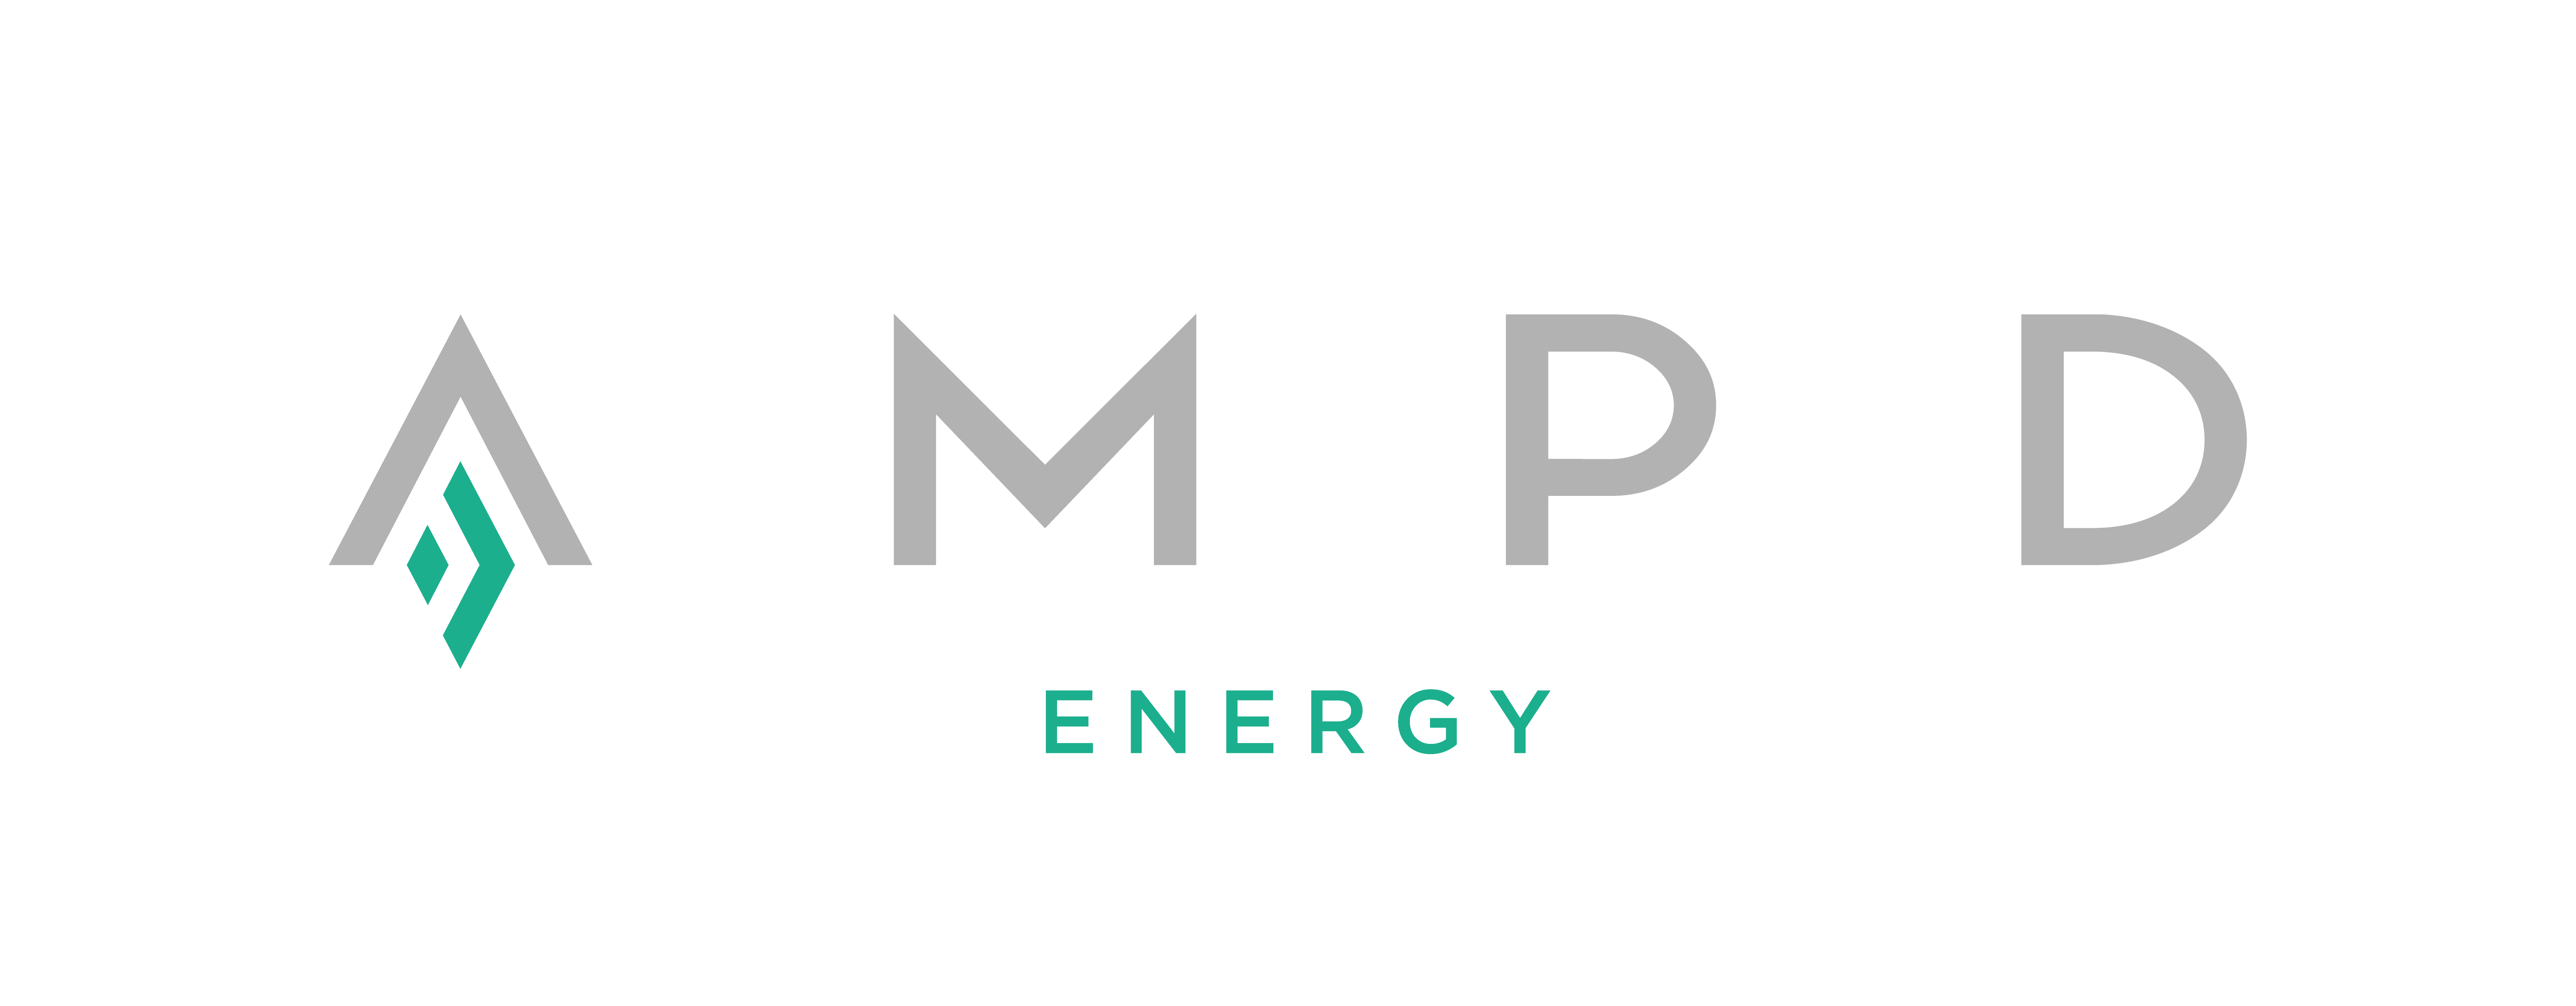 AMPD ENERGY LIMITED